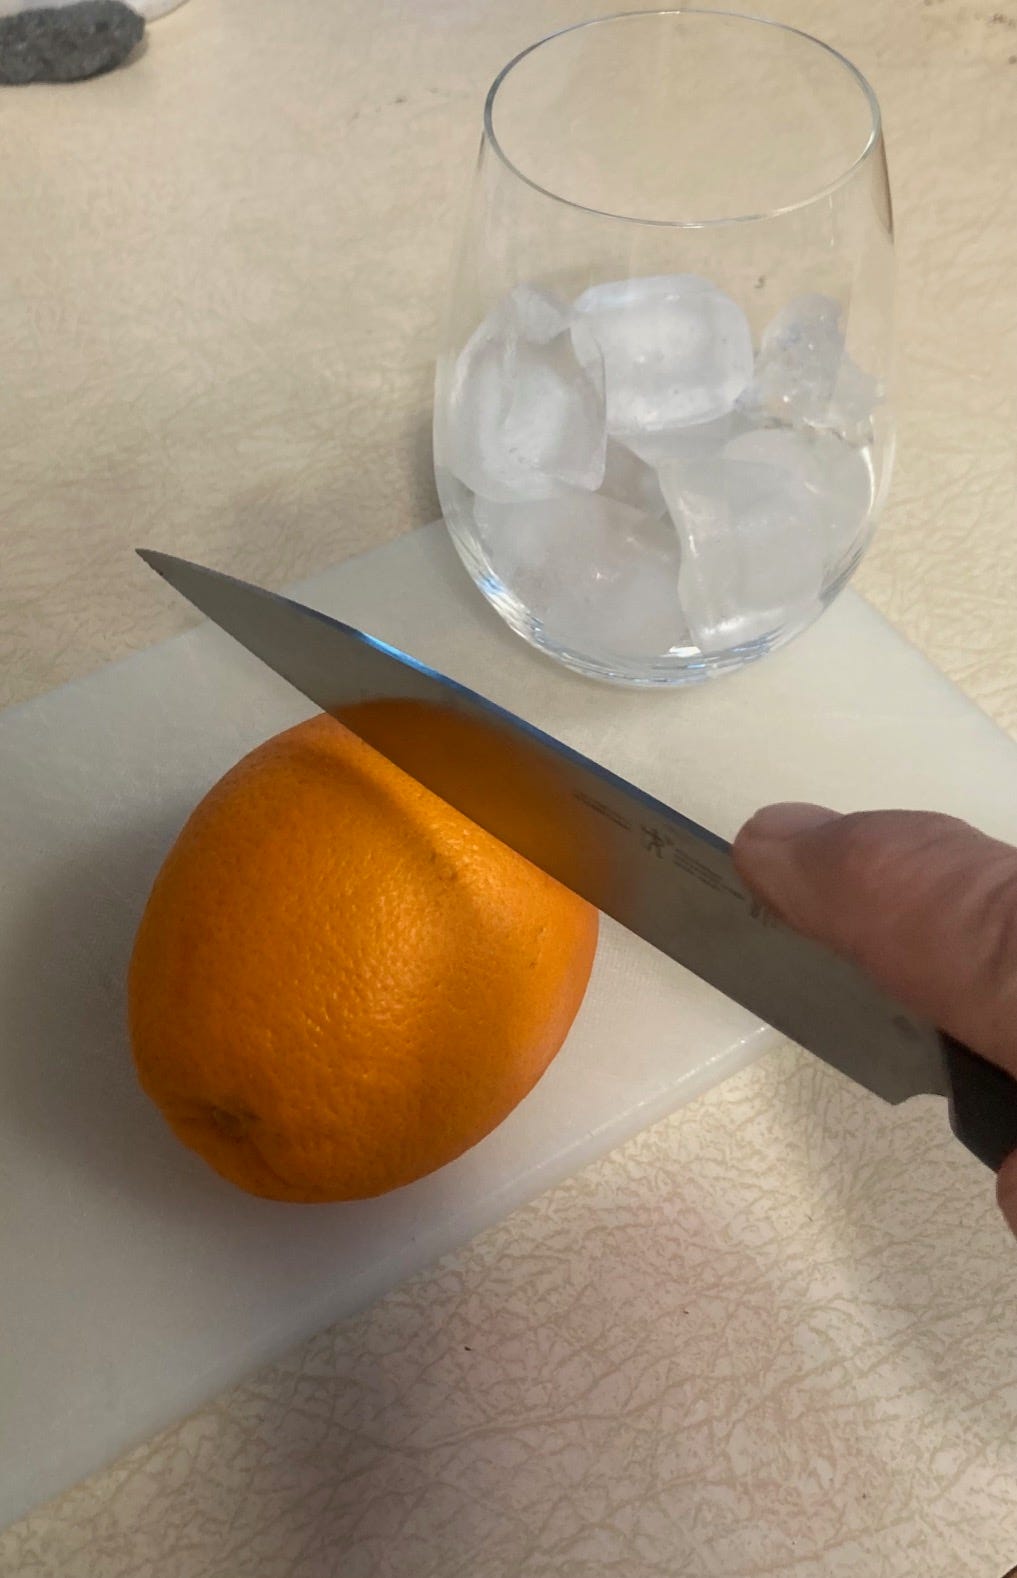 An orange on the cutting board is about to be sliced. A tumbler of ice waits for the drink.